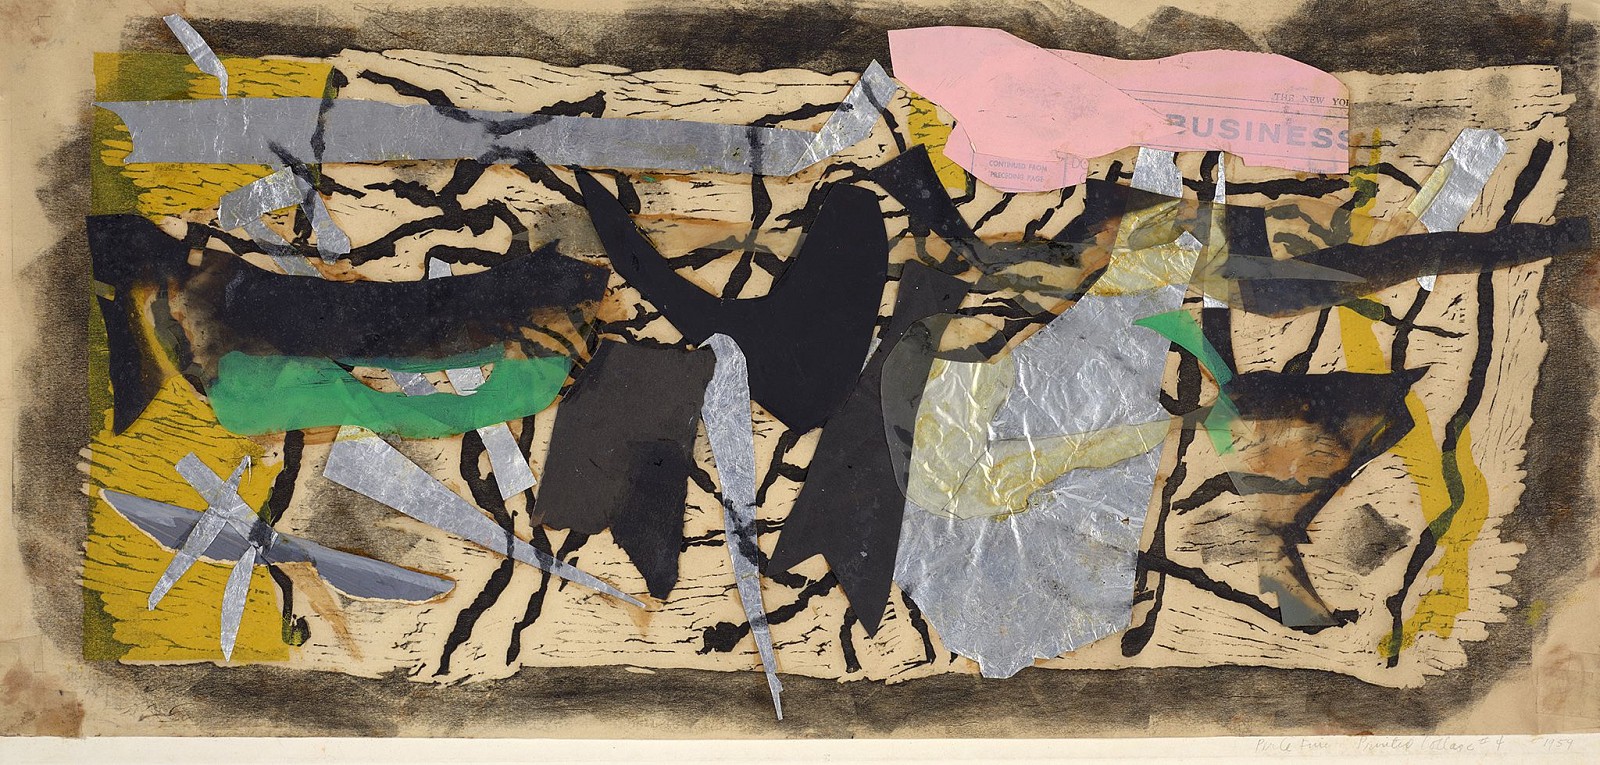 Perle Fine, Printed Collage #4 | SOLD, 1959
Woodcut and Collage on paper, 12 x 25 7/8 in. (30.5 x 65.7 cm)
© A.E. Artworks
FIN-00122